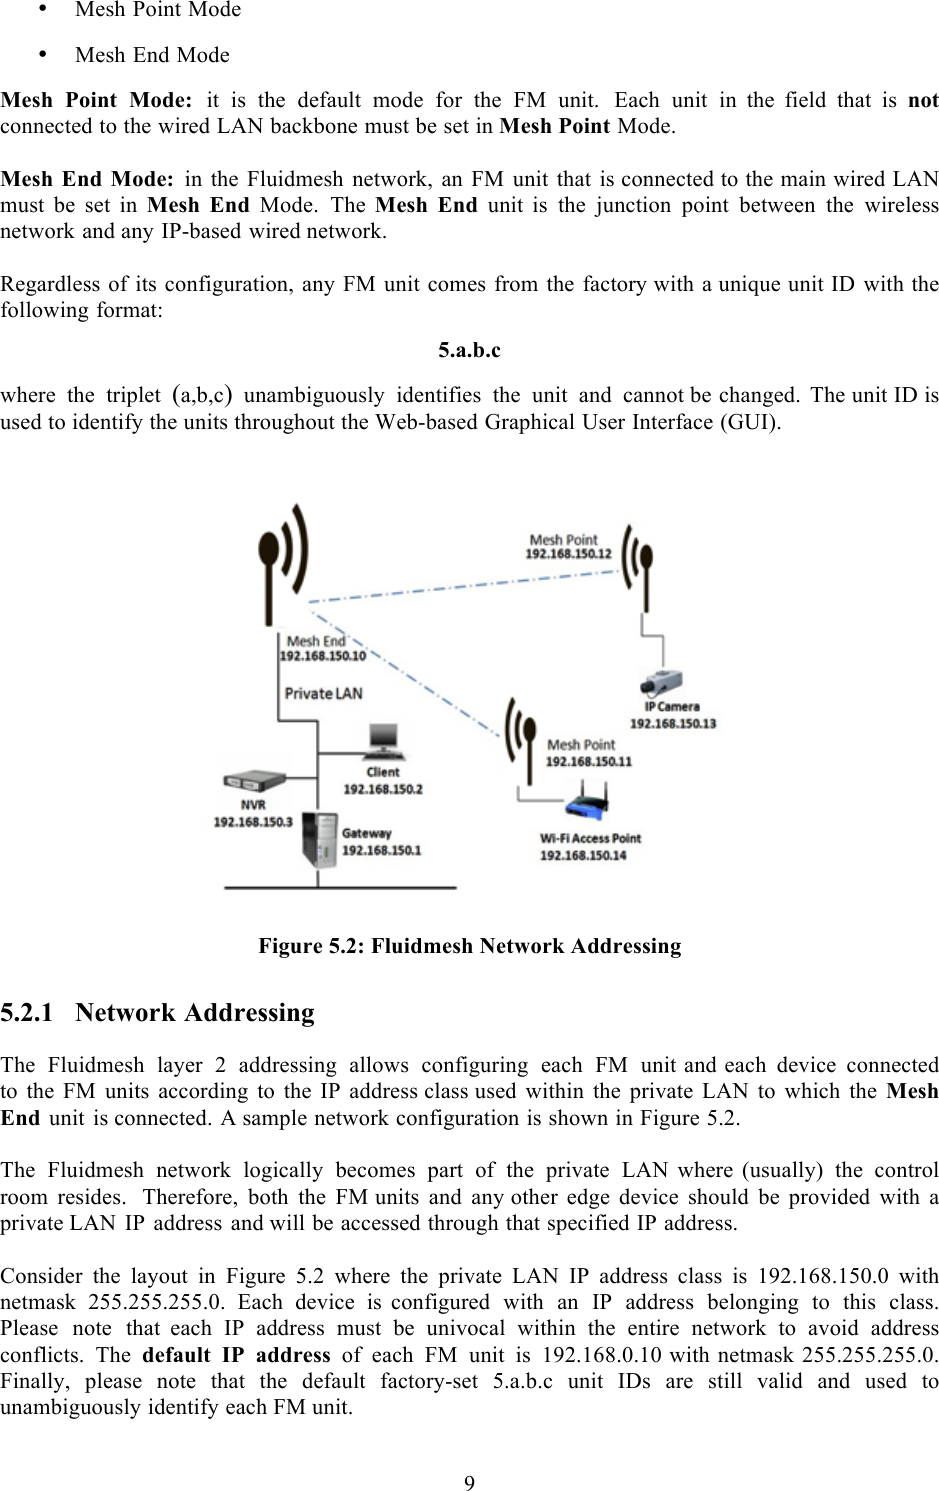  9  • Mesh Point Mode  • Mesh End Mode  Mesh Point Mode: it is the default mode for the FM unit. Each unit in  the  field that is not connected to the wired LAN backbone must be set in Mesh Point Mode.  Mesh End Mode: in the Fluidmesh network, an FM unit that is connected to the main wired LAN must be set in Mesh End Mode. The  Mesh End unit  is the junction point between the wireless network and any IP-based wired network.  Regardless of its configuration, any FM unit comes from the factory with a unique unit ID with the following format:  5.a.b.c  where the triplet (a,b,c)  unambiguously identifies the unit and cannot be changed. The unit ID is used to identify the units throughout the Web-based Graphical User Interface (GUI).    Figure 5.2: Fluidmesh Network Addressing 5.2.1 Network Addressing  The Fluidmesh layer 2 addressing allows configuring each FM unit and each device connected to the FM units according to the IP address class used within the private LAN to which the Mesh End unit is connected. A sample network configuration is shown in Figure 5.2.  The Fluidmesh network logically becomes part of the private LAN  where  (usually) the control room resides.  Therefore, both the FM units and any other edge device should be provided with  a private LAN IP address and will be accessed through that specified IP address.  Consider the layout in Figure 5.2 where the private LAN IP address class is 192.168.150.0 with netmask 255.255.255.0. Each device is  configured with an IP address belonging to this class. Please note that  each IP address must be univocal within the entire network to avoid address conflicts. The default IP address of each FM unit is 192.168.0.10 with netmask 255.255.255.0. Finally, please note that the default factory-set 5.a.b.c unit IDs are still valid and used to unambiguously identify each FM unit.  